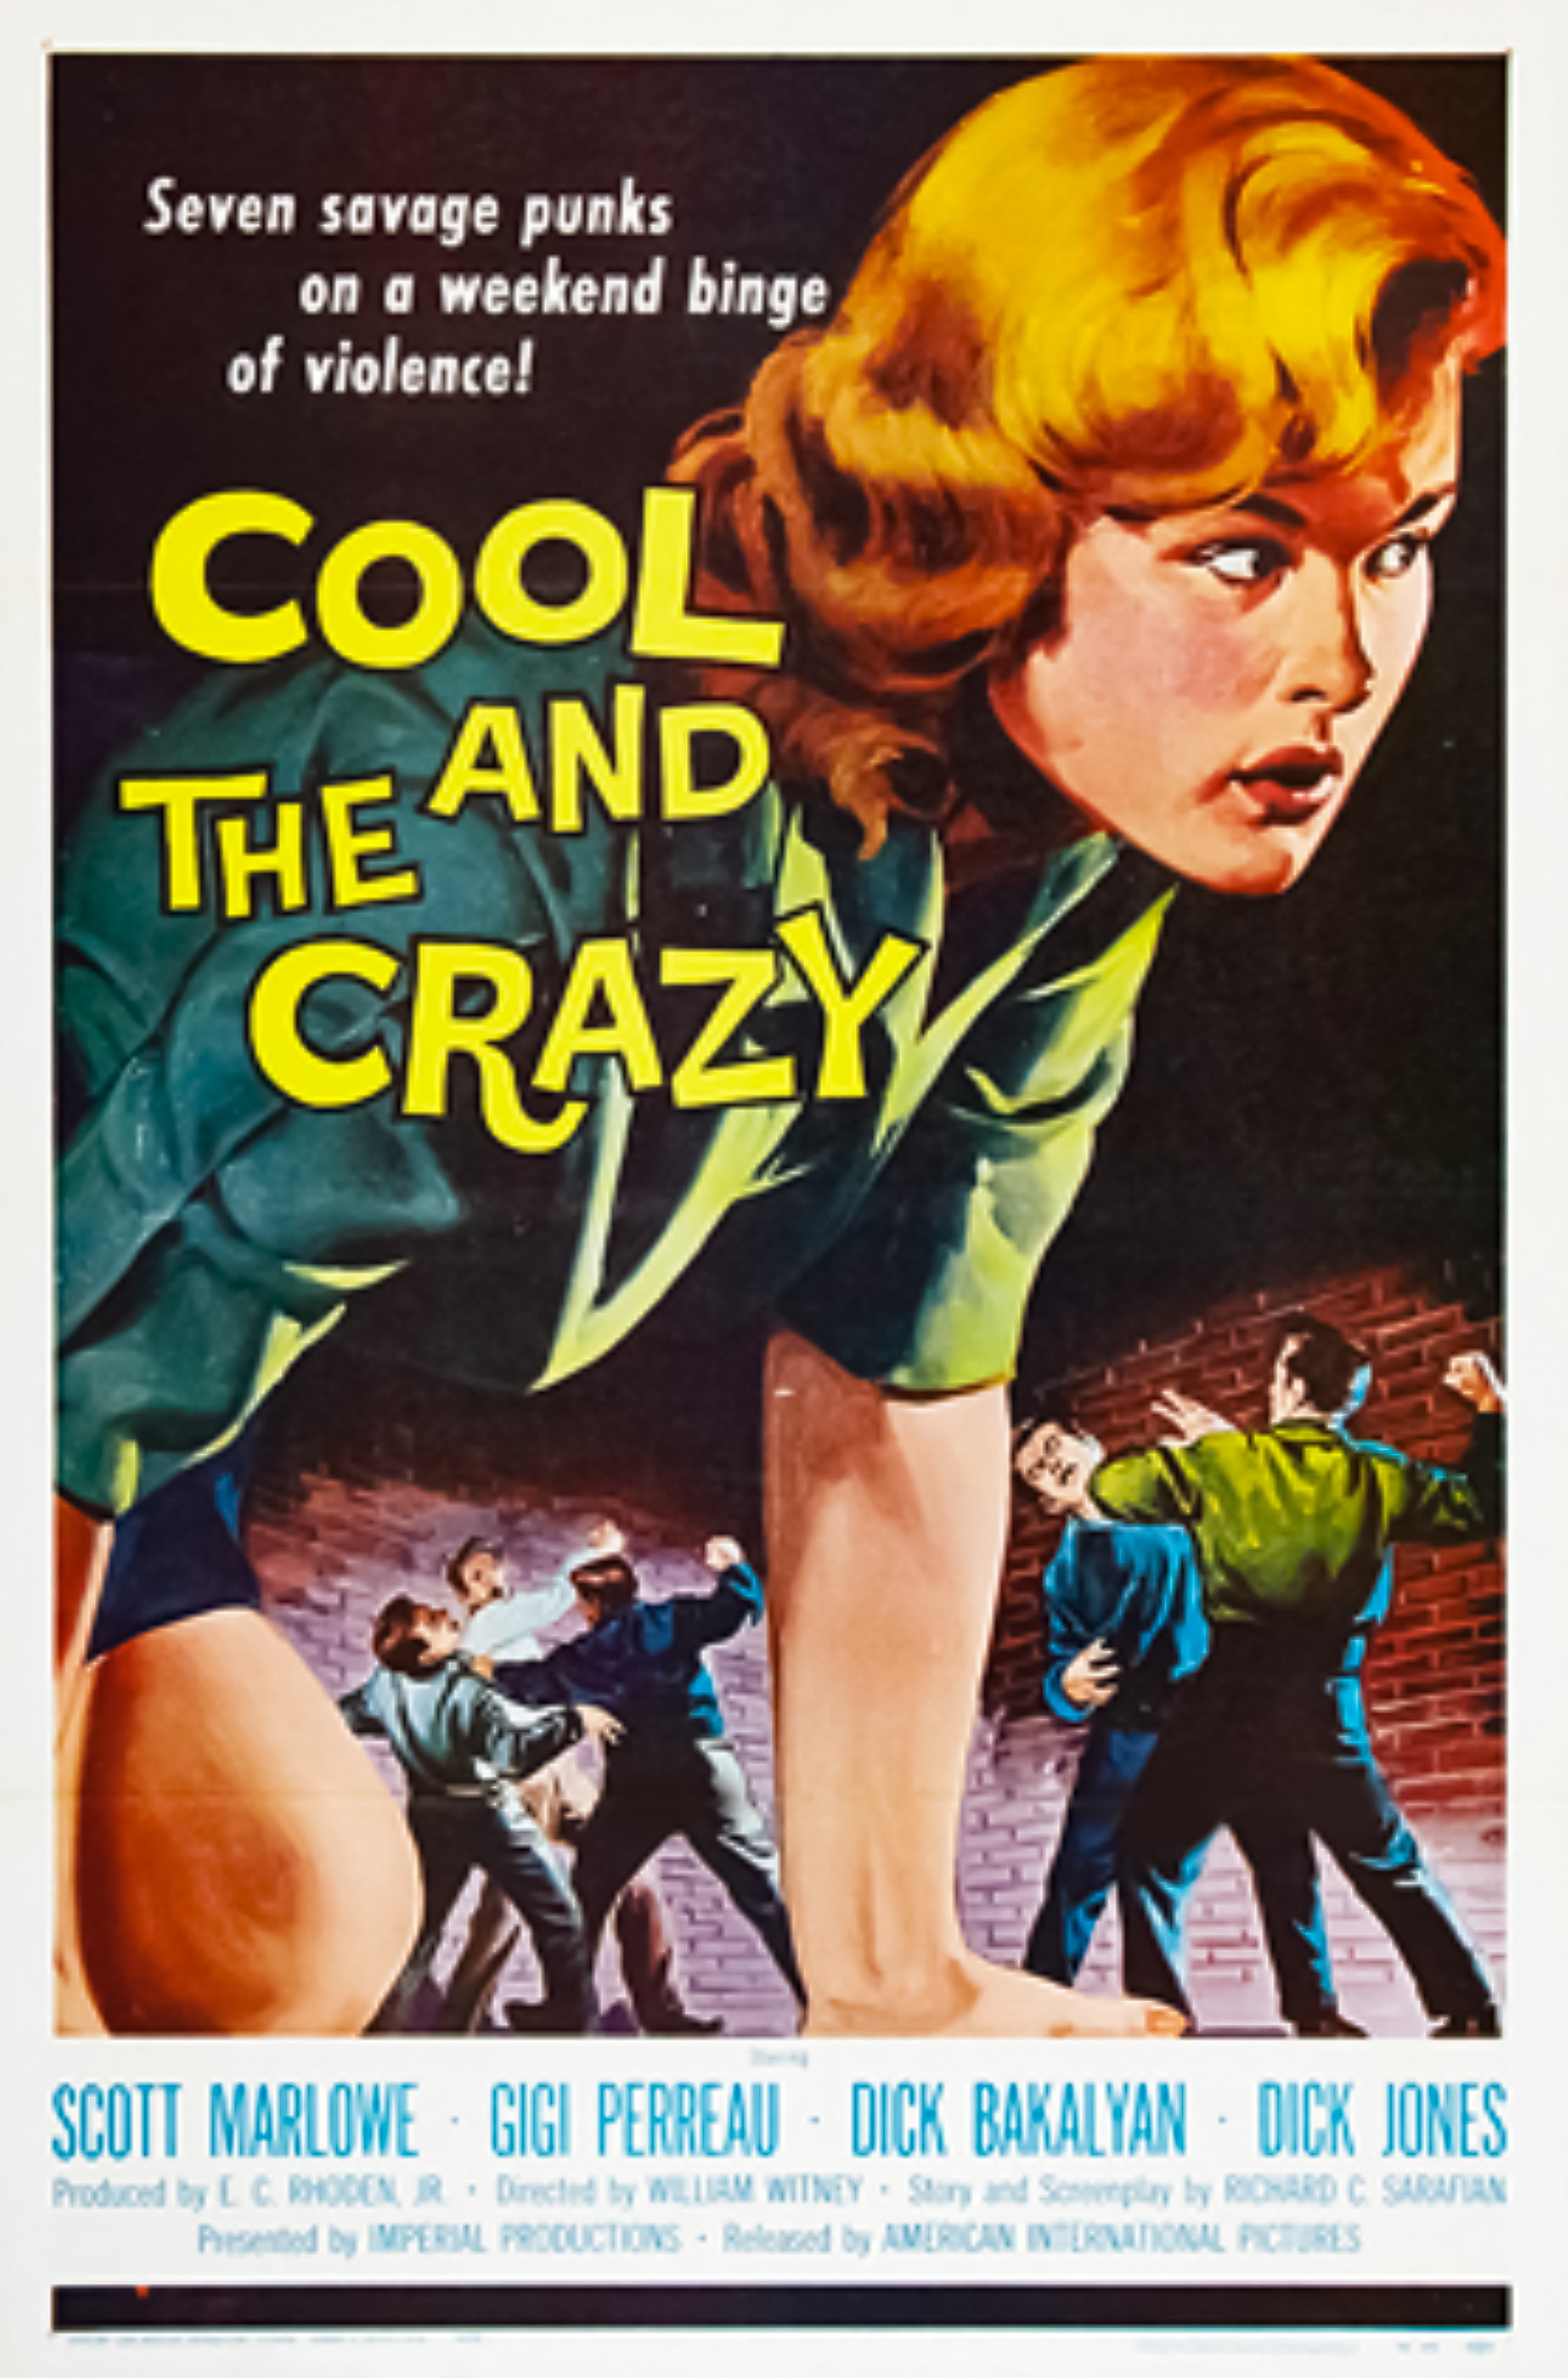 The Cool and the Crazy (1958) Screenshot 4